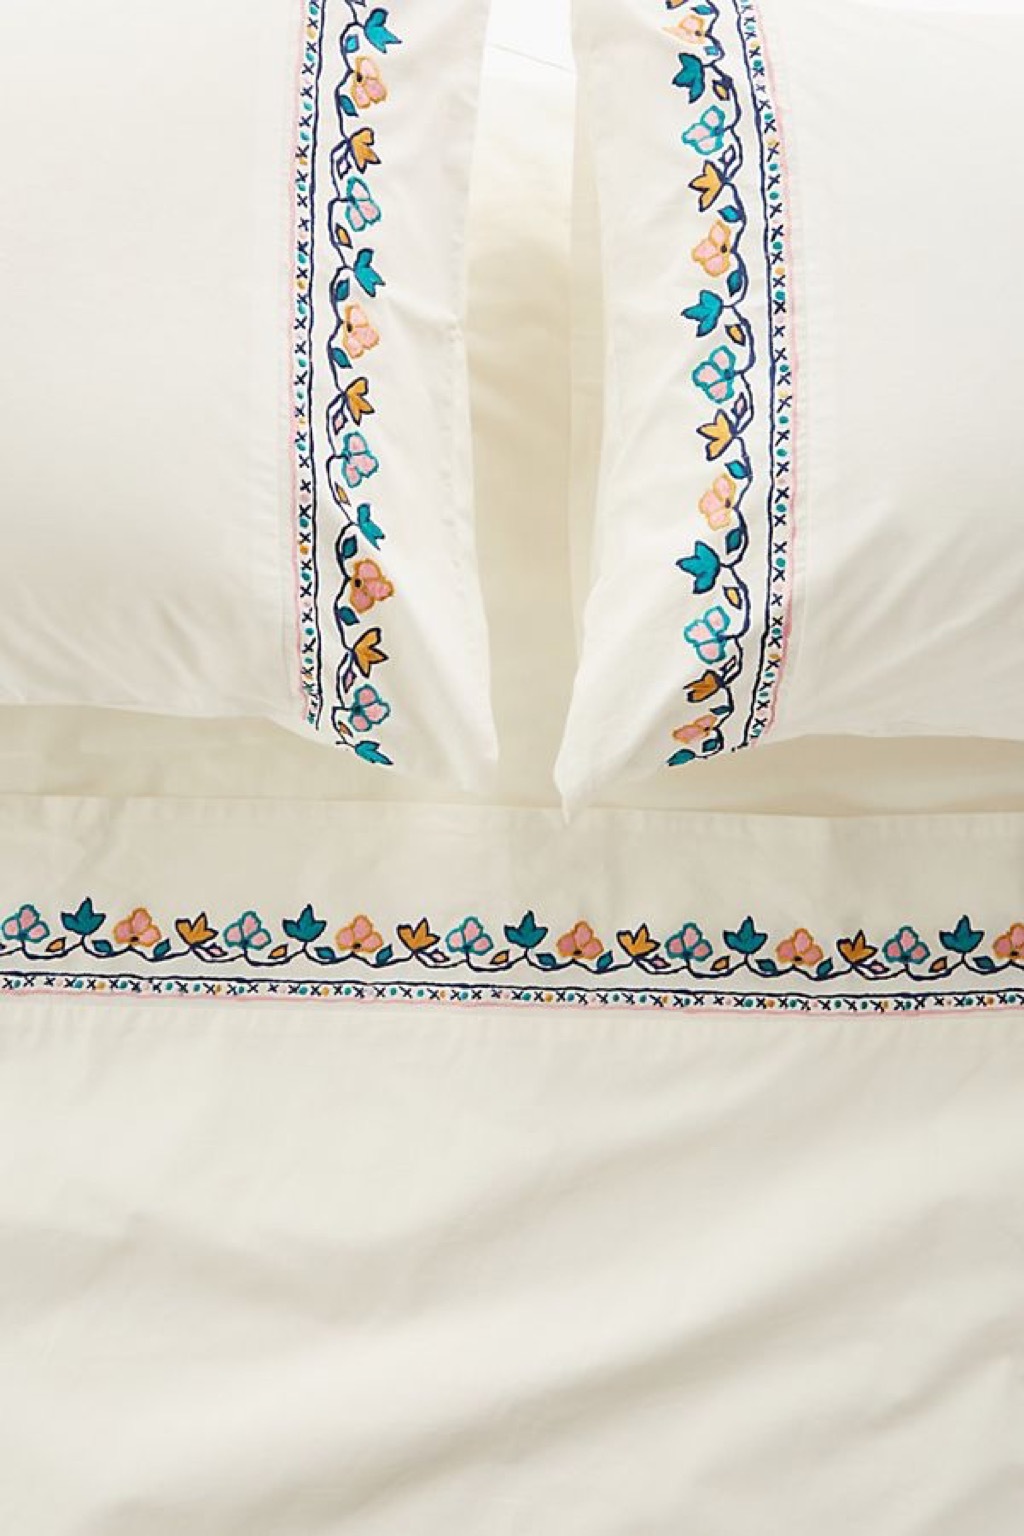 Anthropologie Sheets {Save Money on Bed and Bath Items}